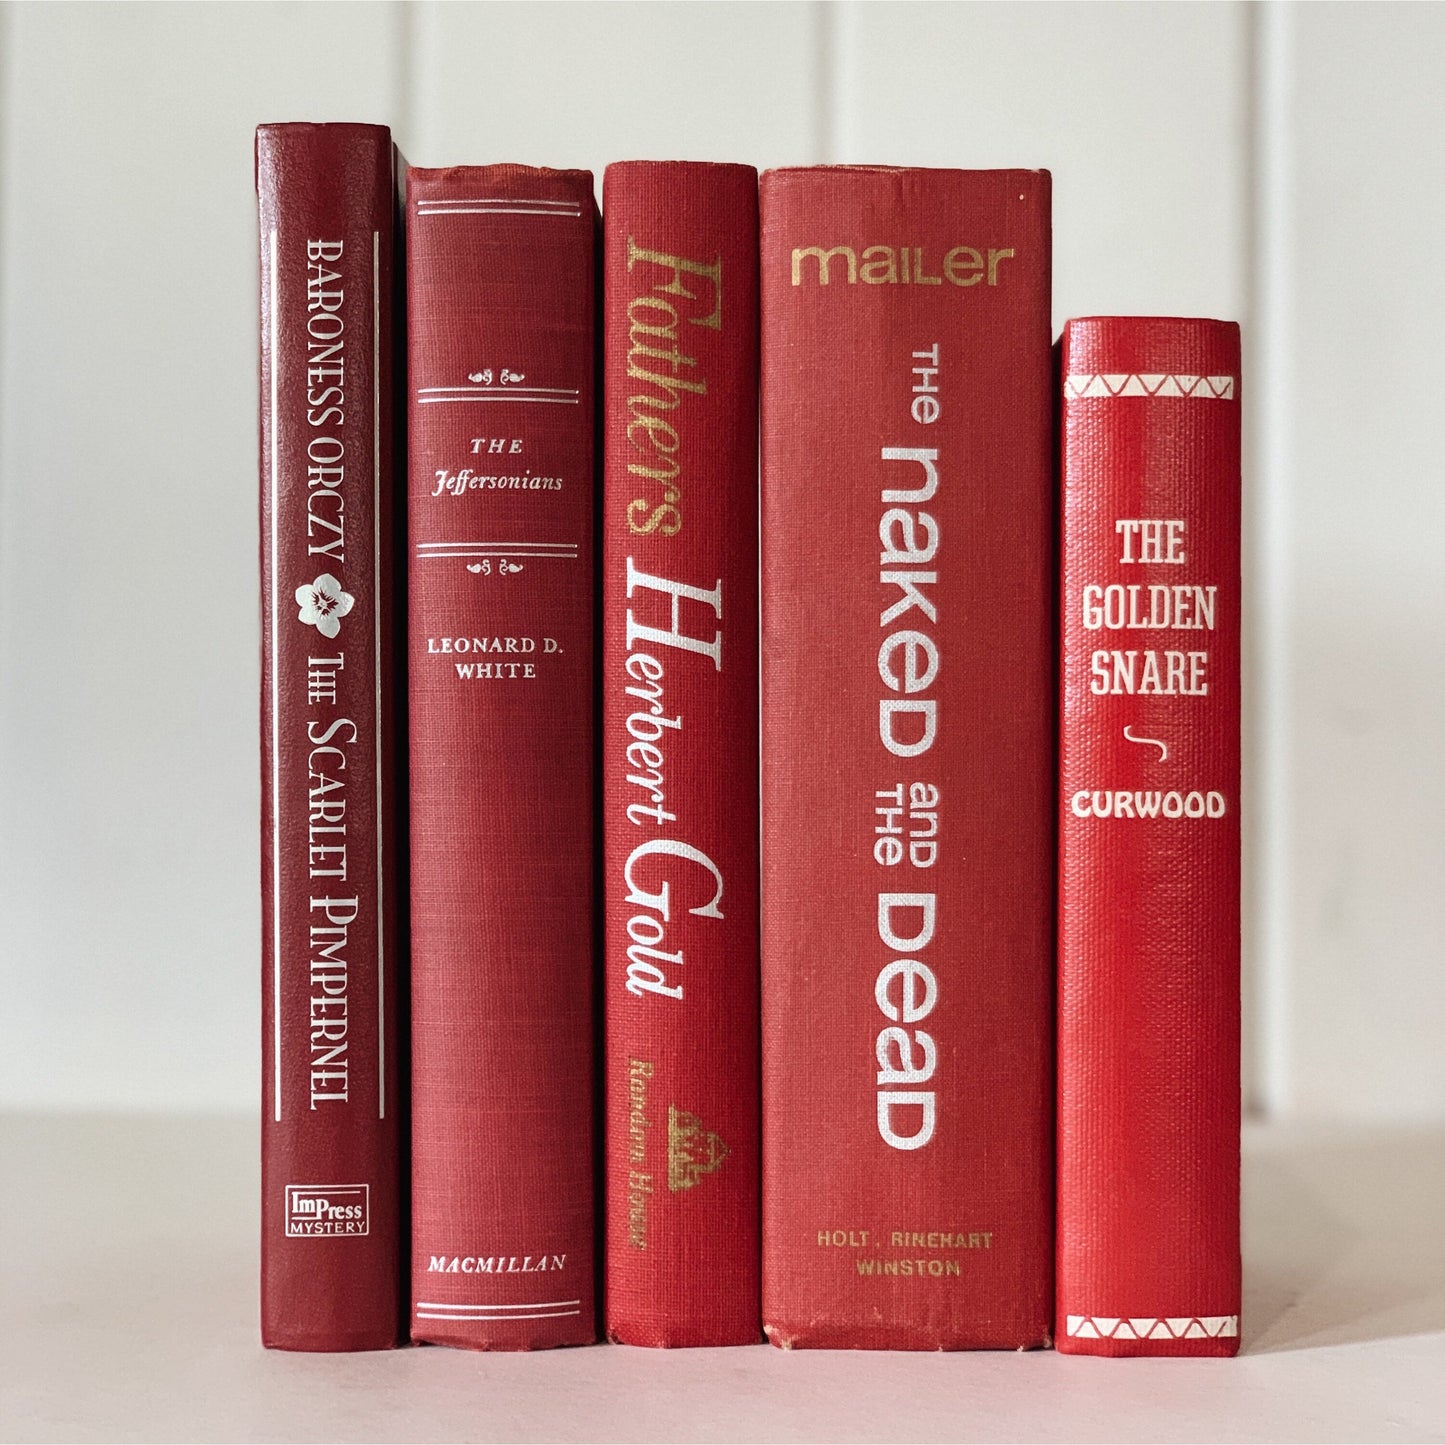 Vintage Red Book Bundle with White Lettering, Red and White Book Decor